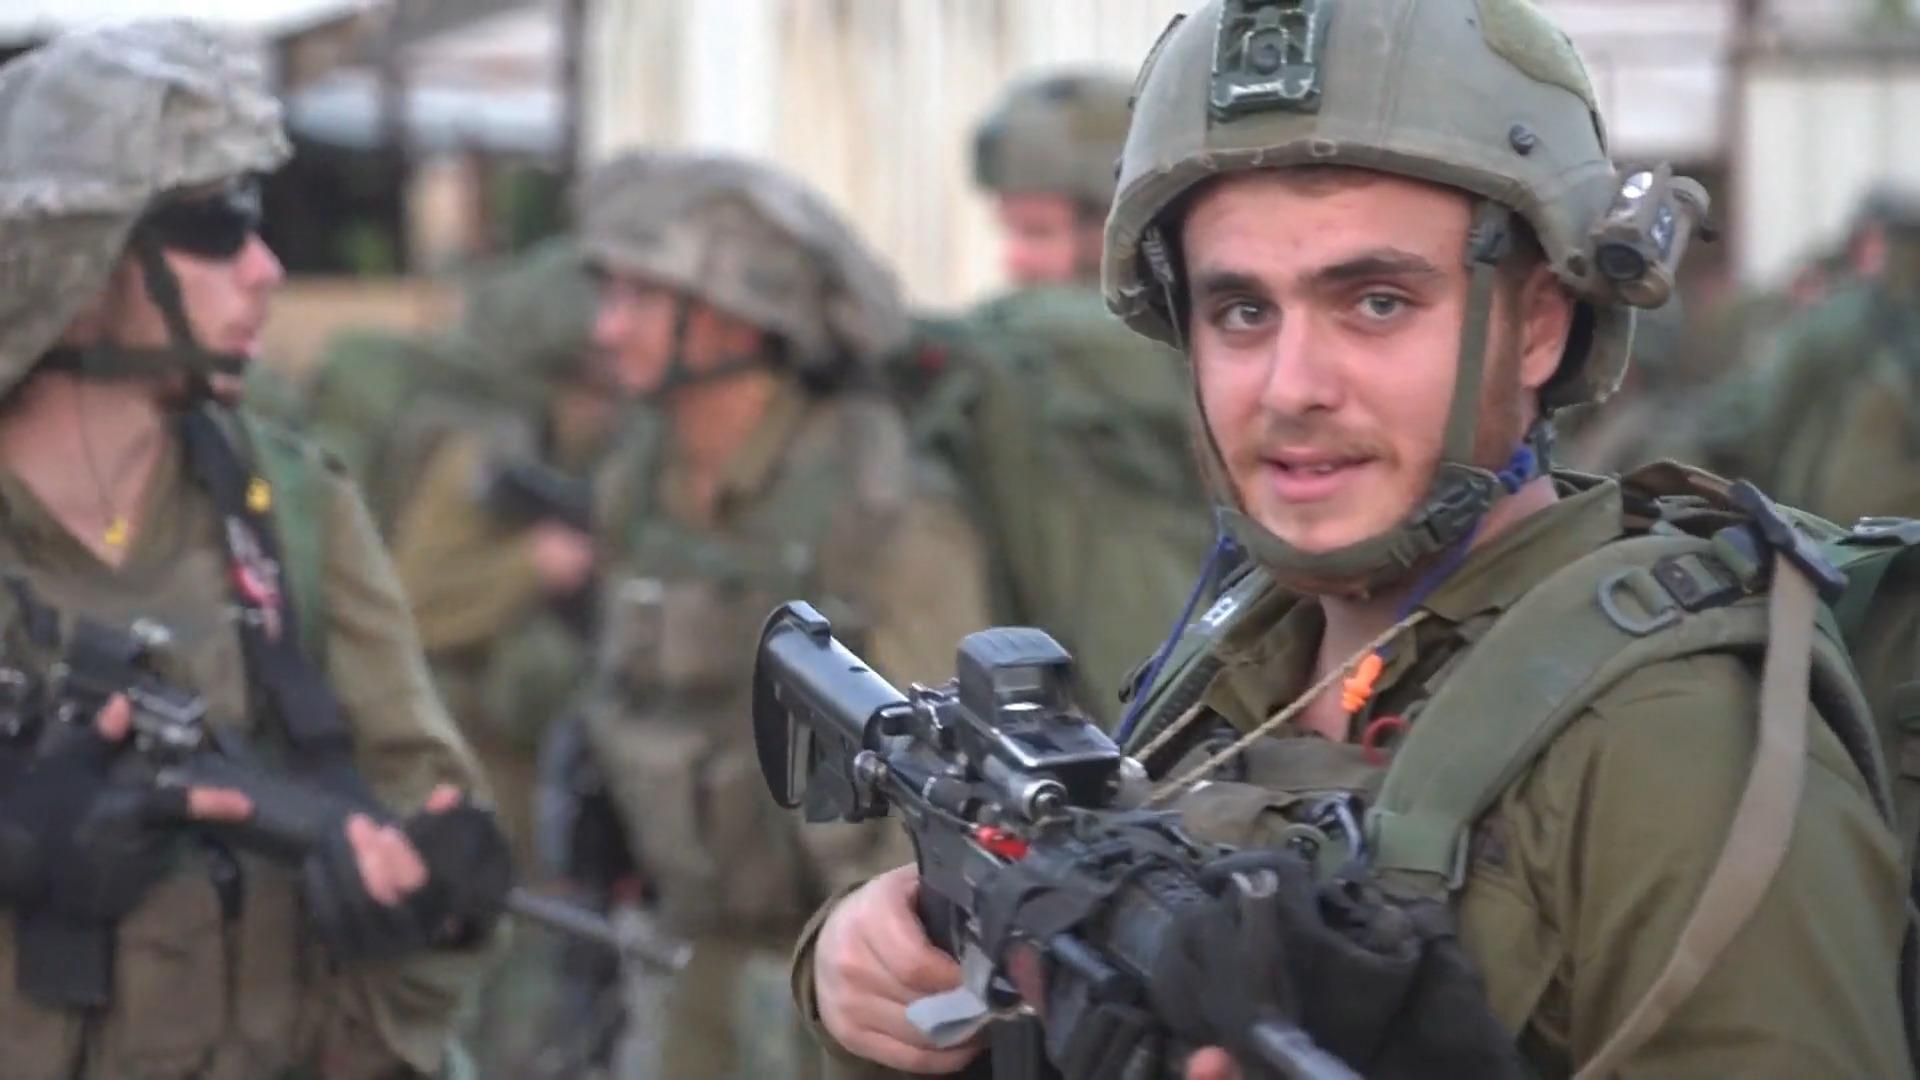 Israel prepares for ground attack How severe will Israel's military response be?